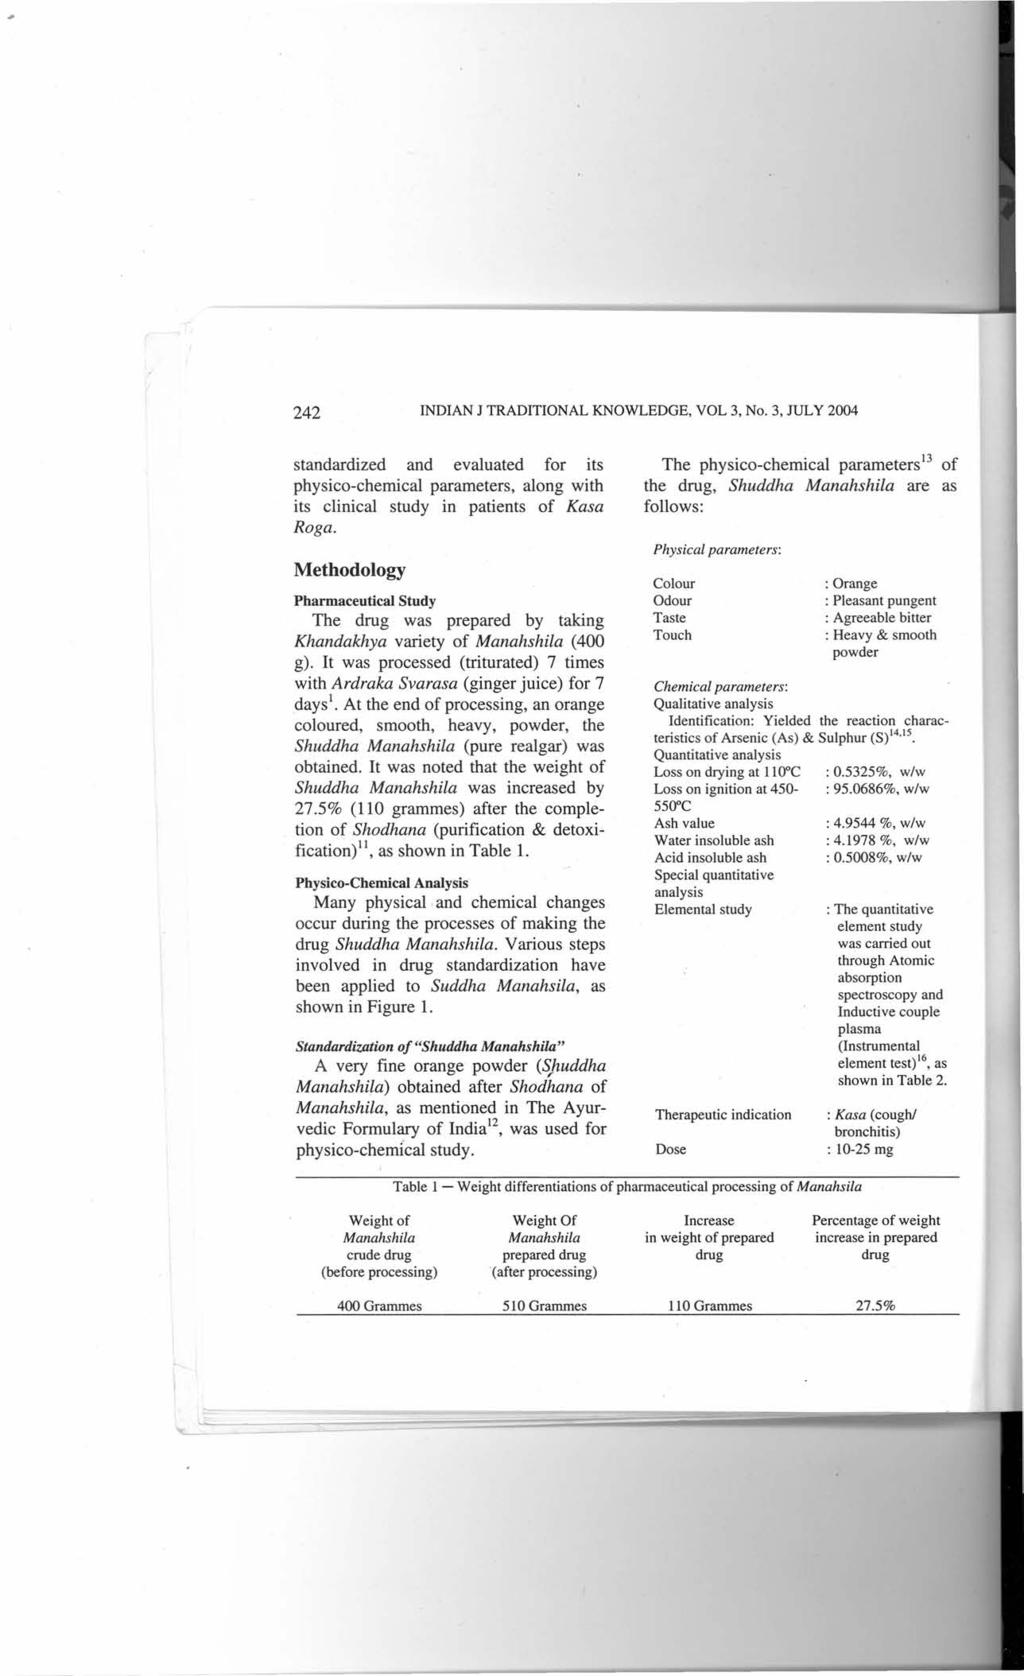 242 INDIAN J TRADITIONAL KNOWLEDGE, VOL 3, No. 3, JULY 2004 standardized and evaluated for its physico-chemical parameters, along with its clinical study in patients of Kasa Roga.